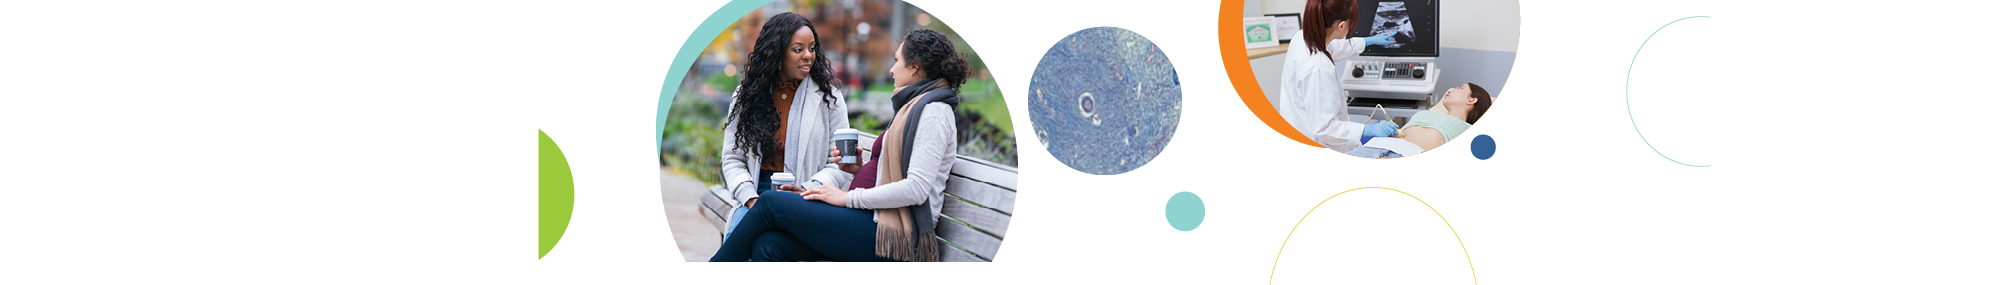 A series of three circular images related to uterine fibroids, including two women sitting on a bench, holding coffee cups, and engaged in conversation (left), a microscopic slide showing the cellular structure of uterine fibroids (center), and a medical professional performing an ultrasound examination on a patient (right). 